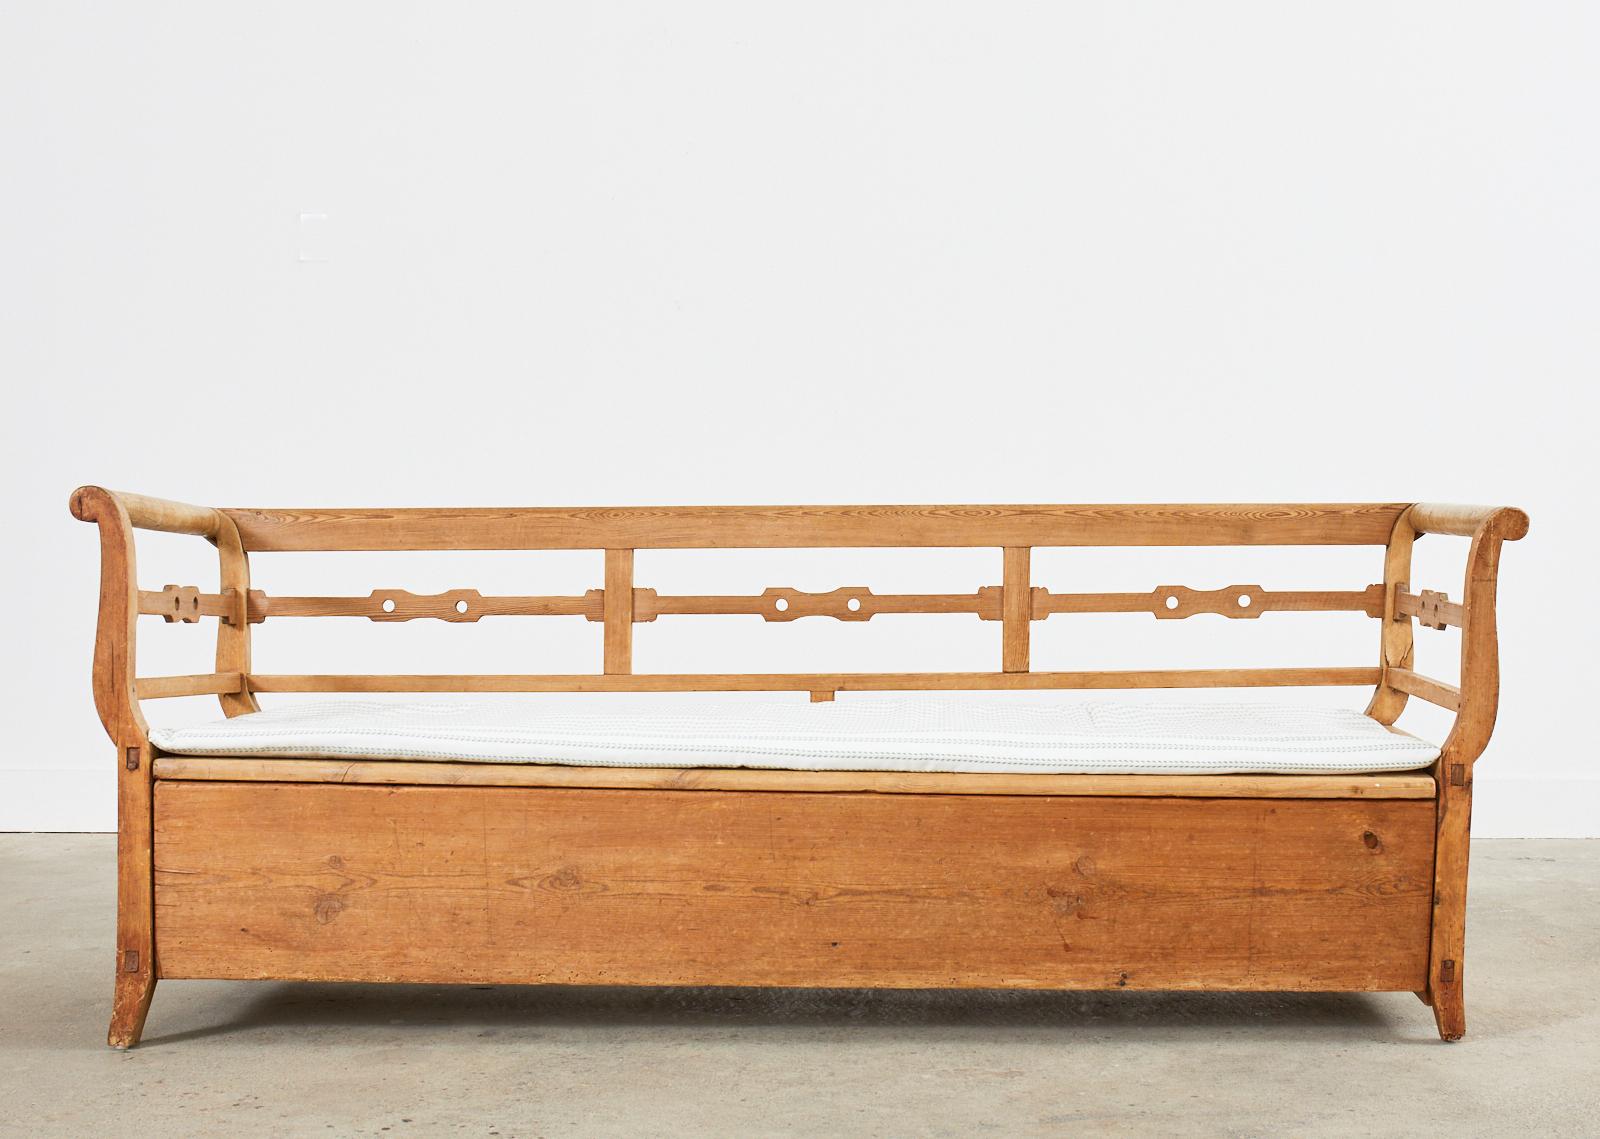 Hand-Crafted 19th Century Country Swedish Farmhouse Pine Bench For Sale